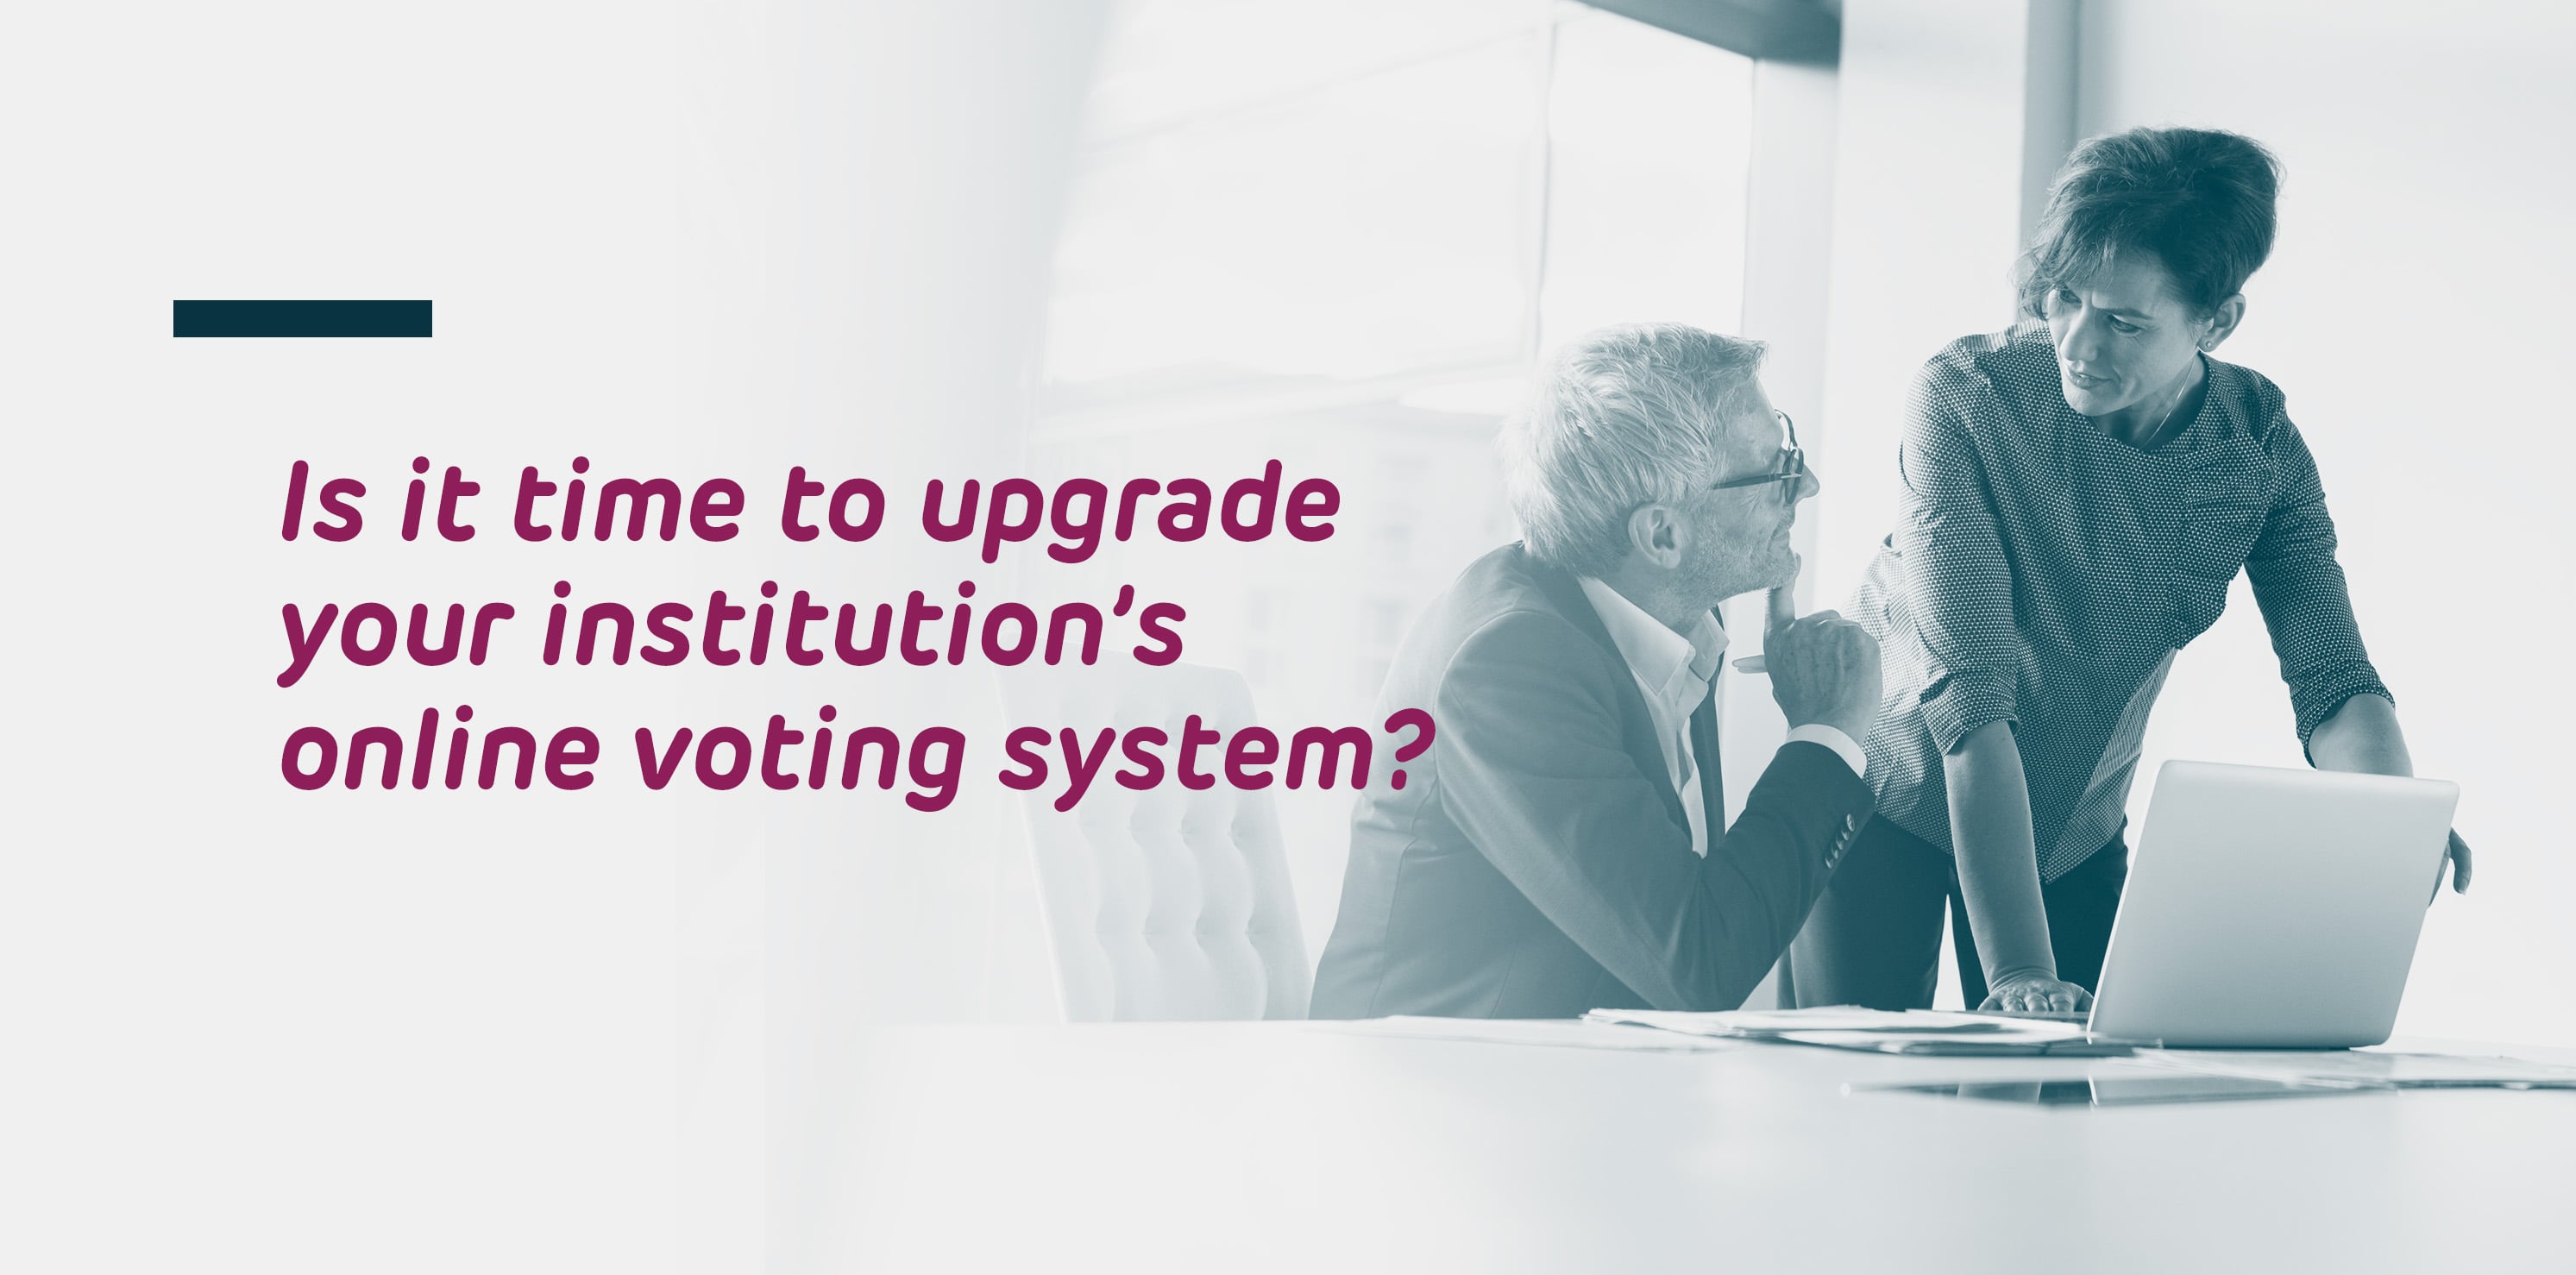 Is it time to upgrade your institution's online voting system?